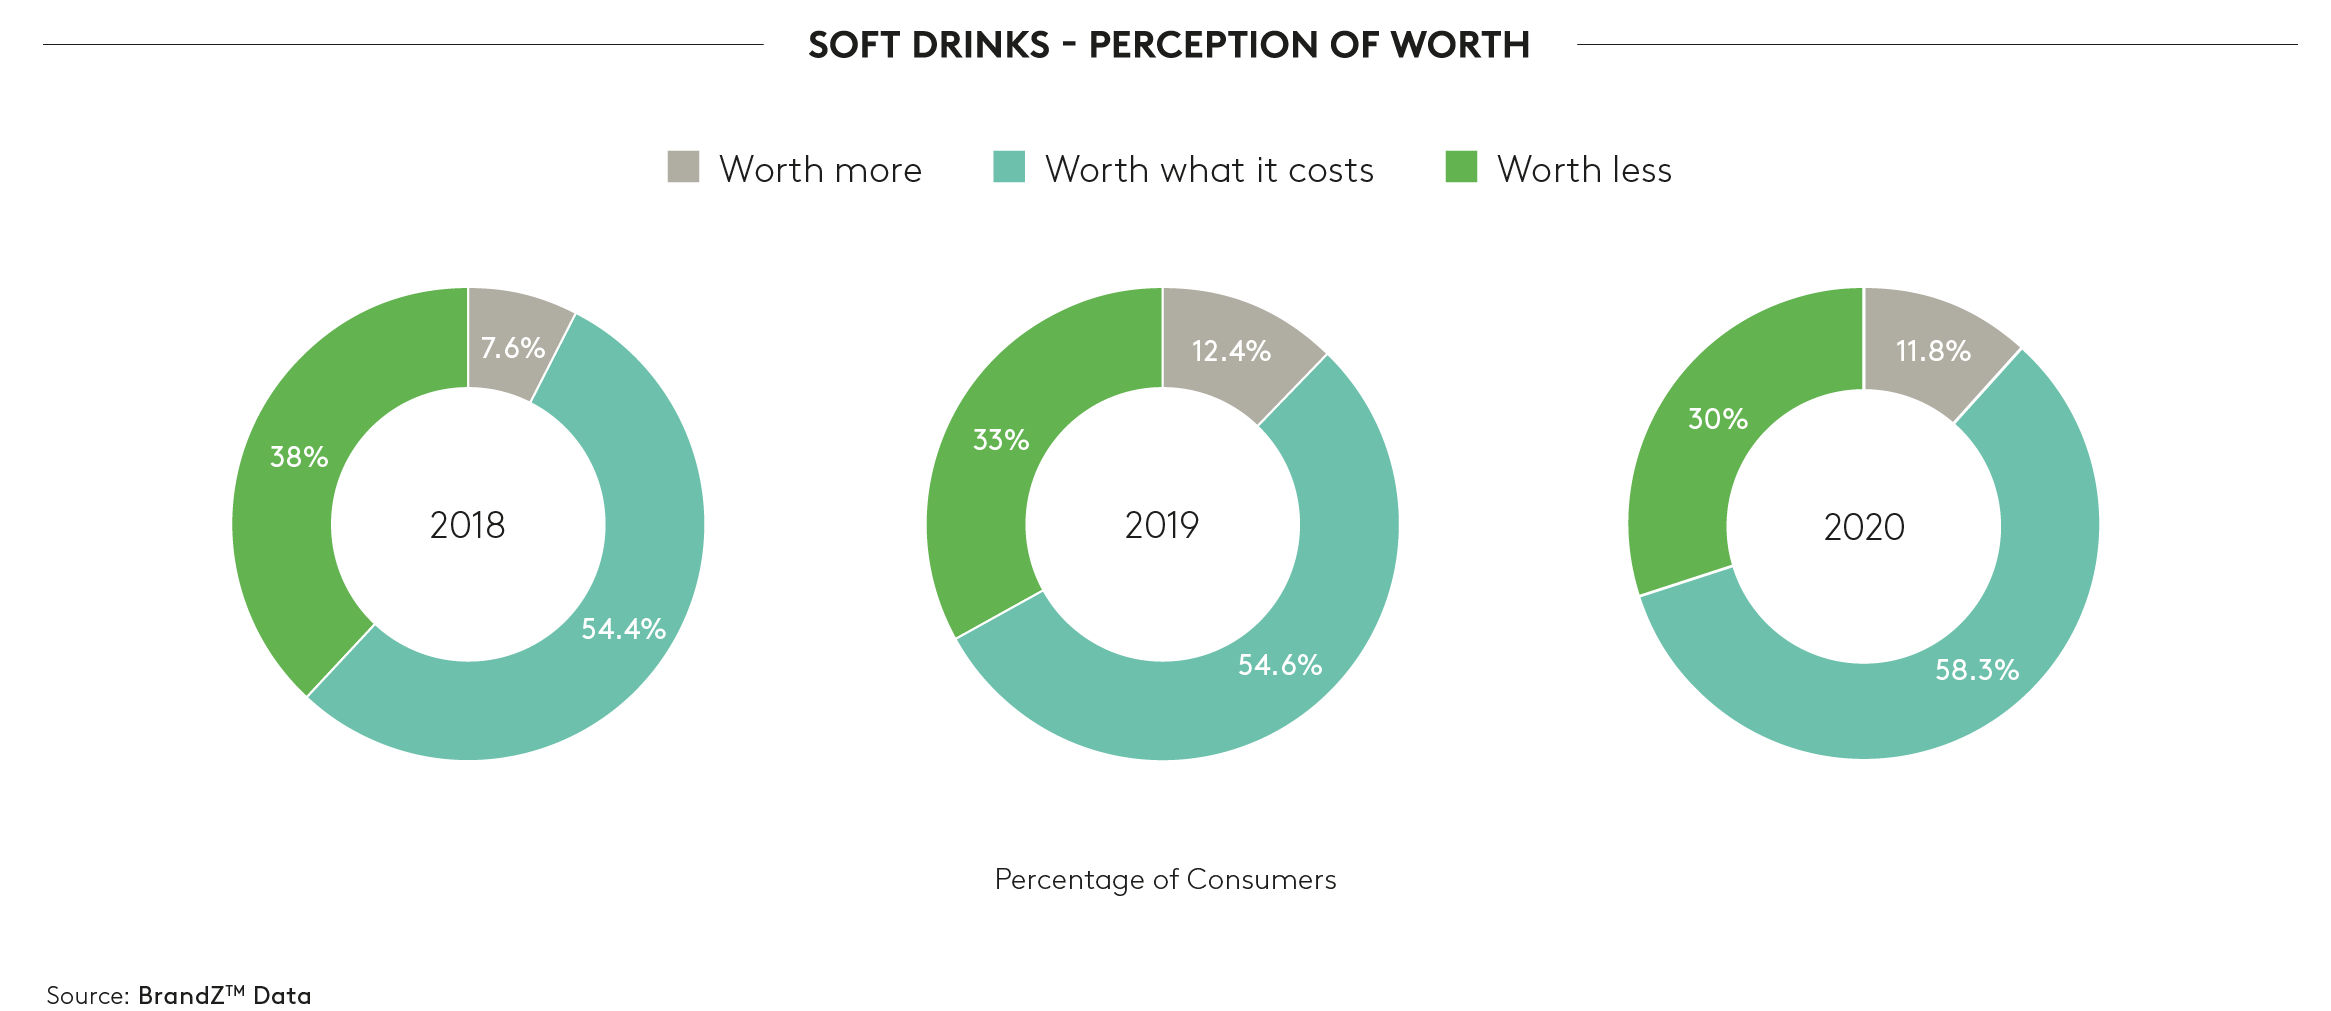 Soft drinks perceived as worth the cost after COVID-19